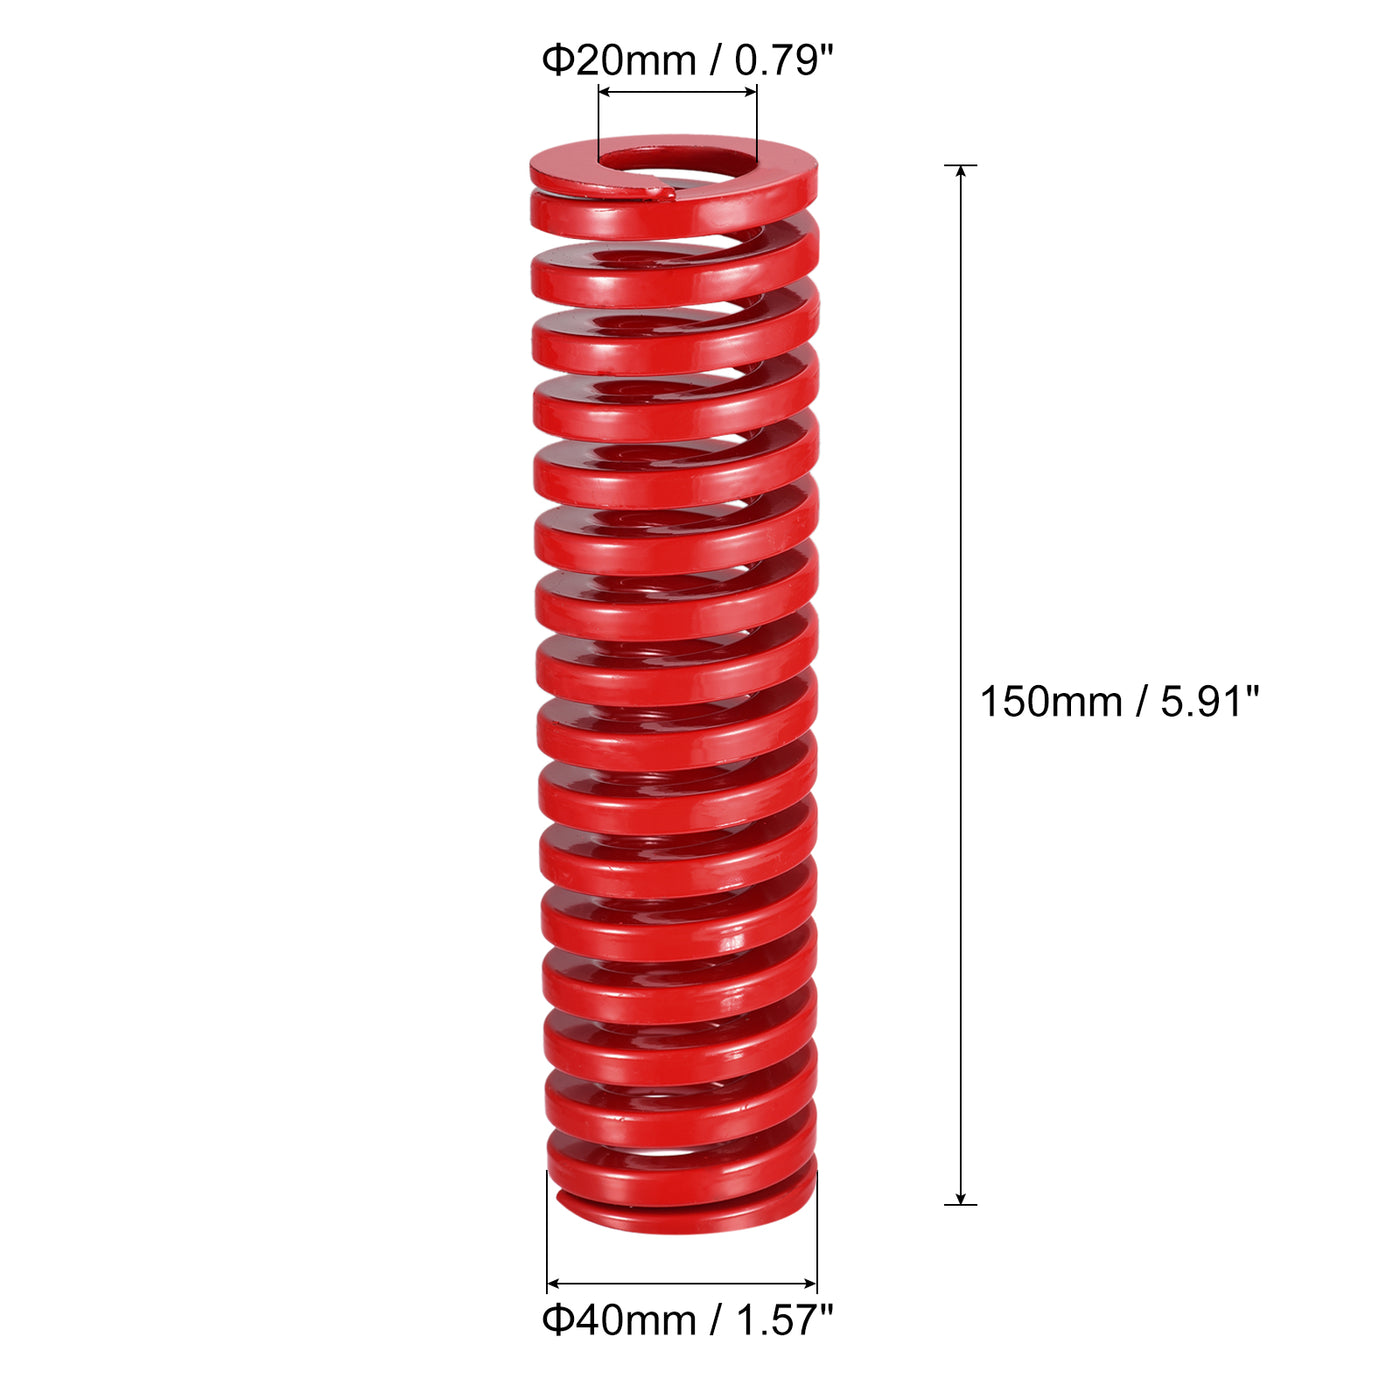 uxcell Uxcell Die Spring, 40mm OD 150mm Long Spiral Stamping Medium Load Compression, Red